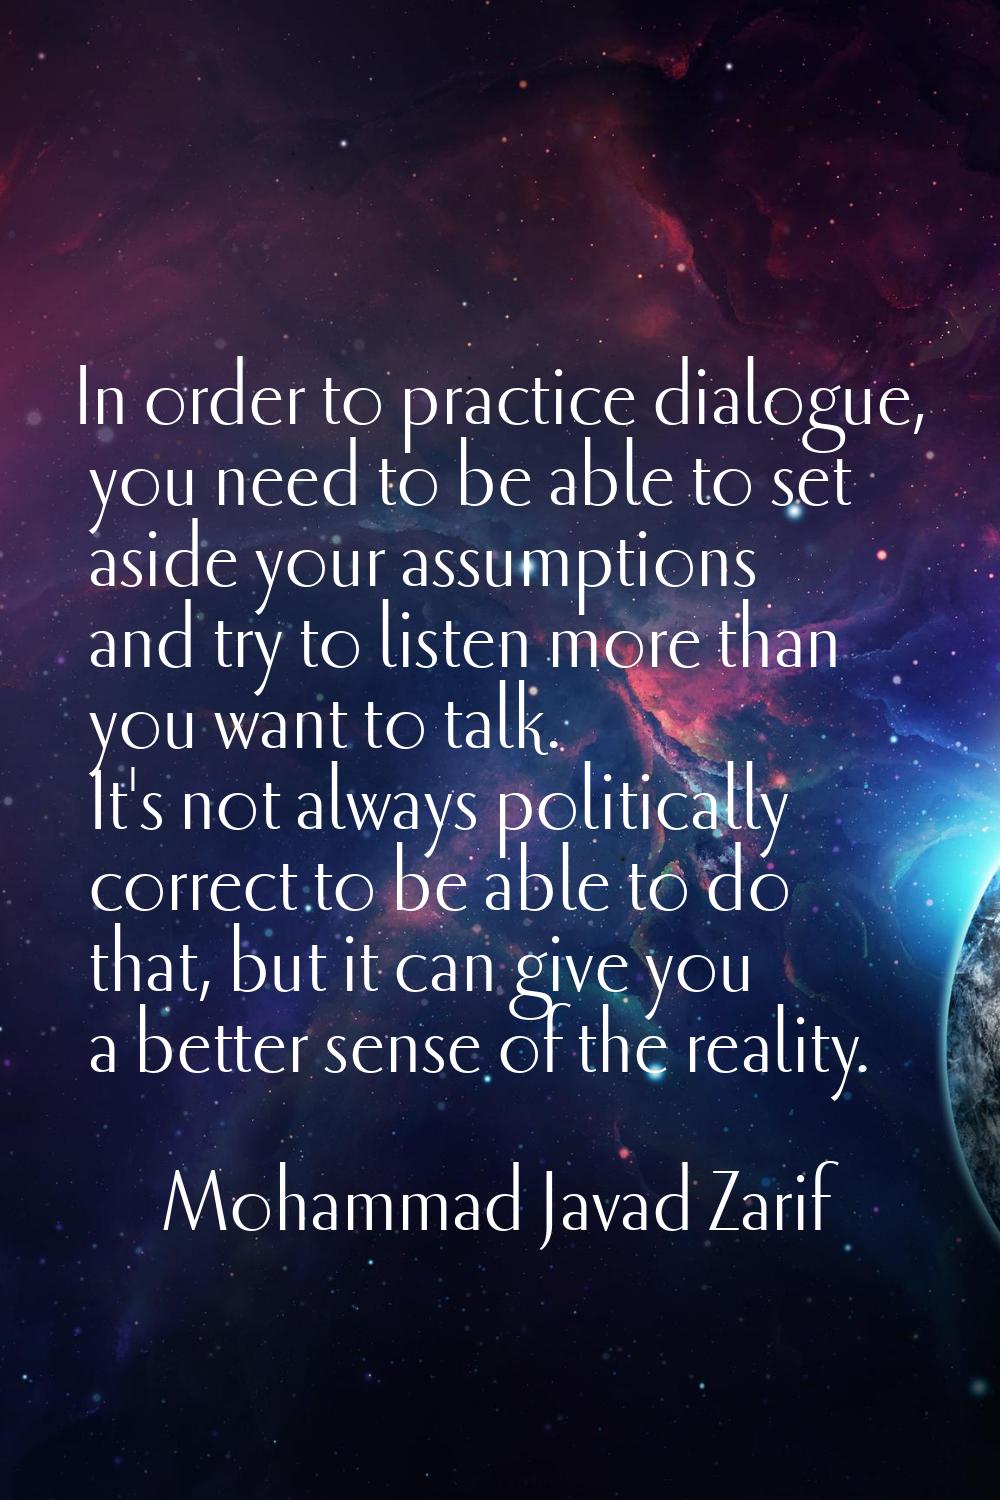 In order to practice dialogue, you need to be able to set aside your assumptions and try to listen 